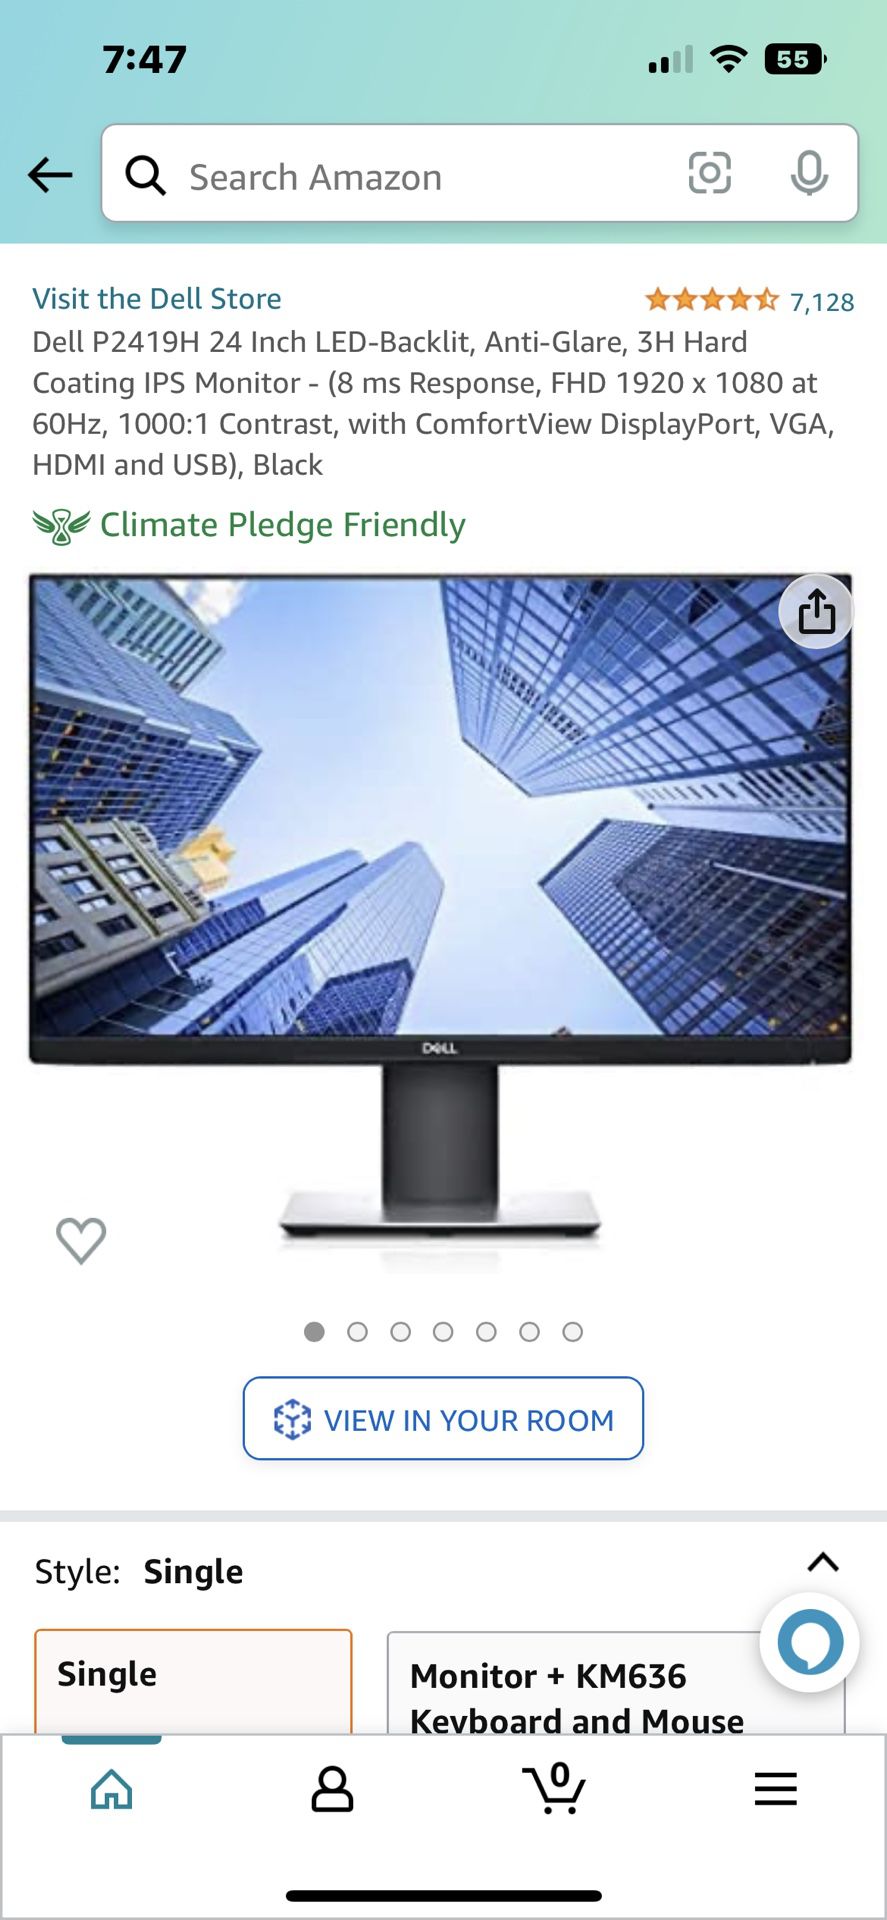 Dell P2419H 24 Inch LED-Backlit, Anti-Glare, 3H Hard Coating IPS Monitor - (8 ms Response, FHD 1920 x 1080 at 60Hz, 1000:1 Contrast, with ComfortView 